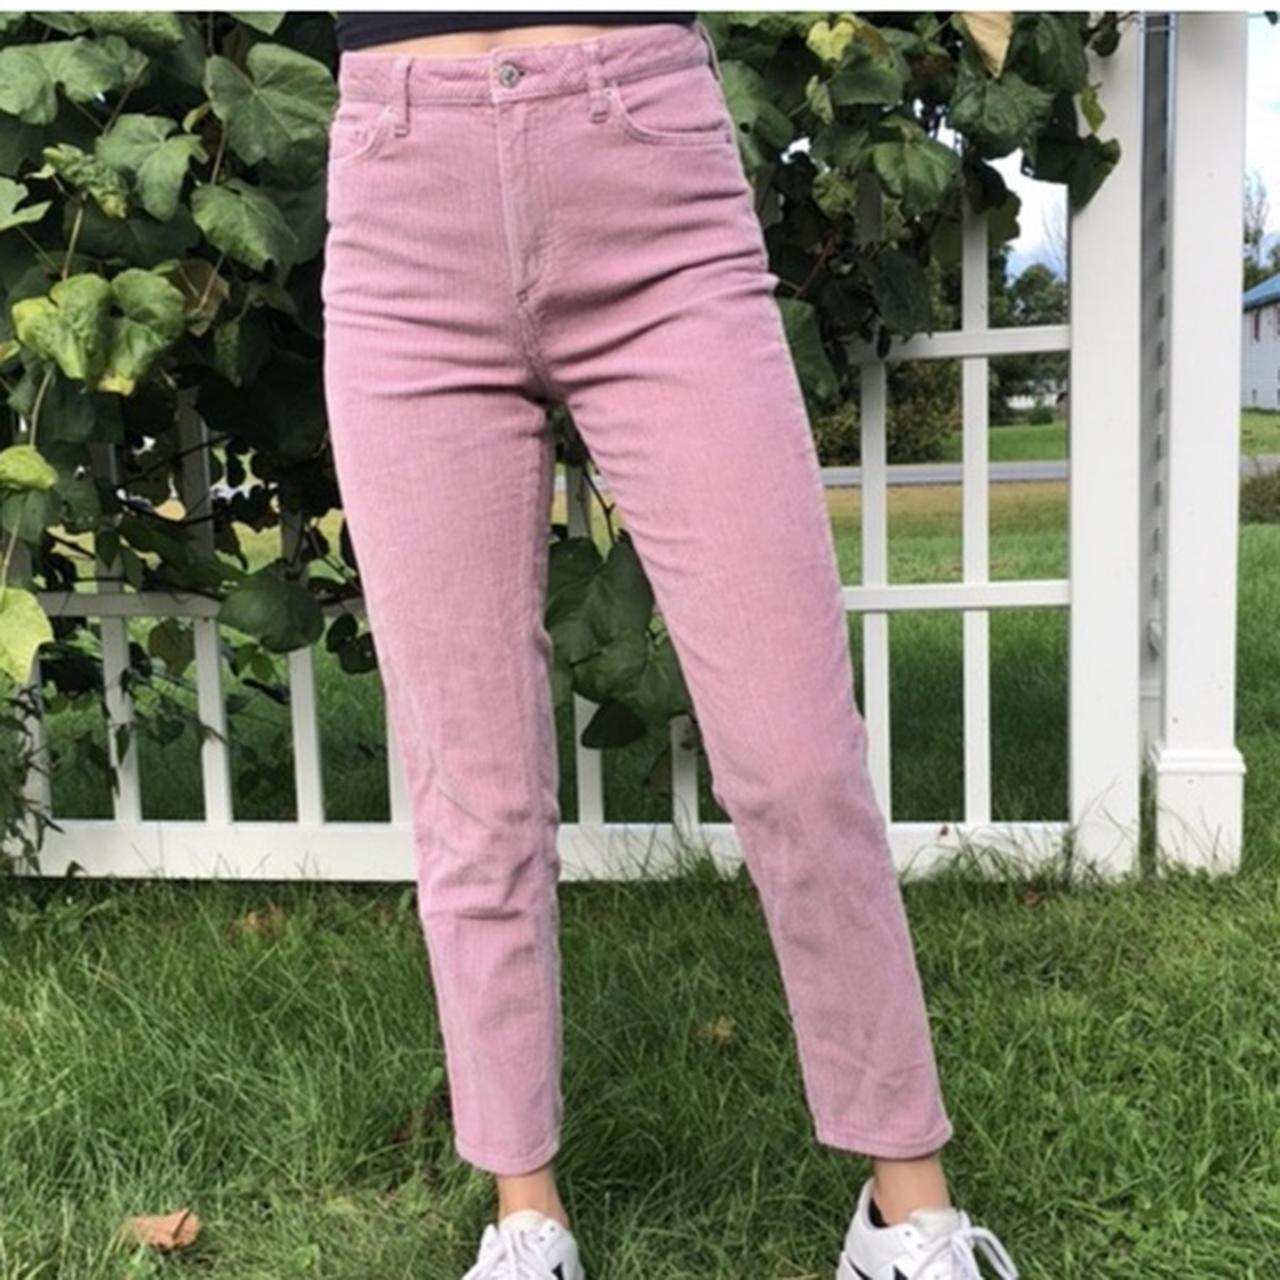 Large and high waist pants produced in light pink corduroy